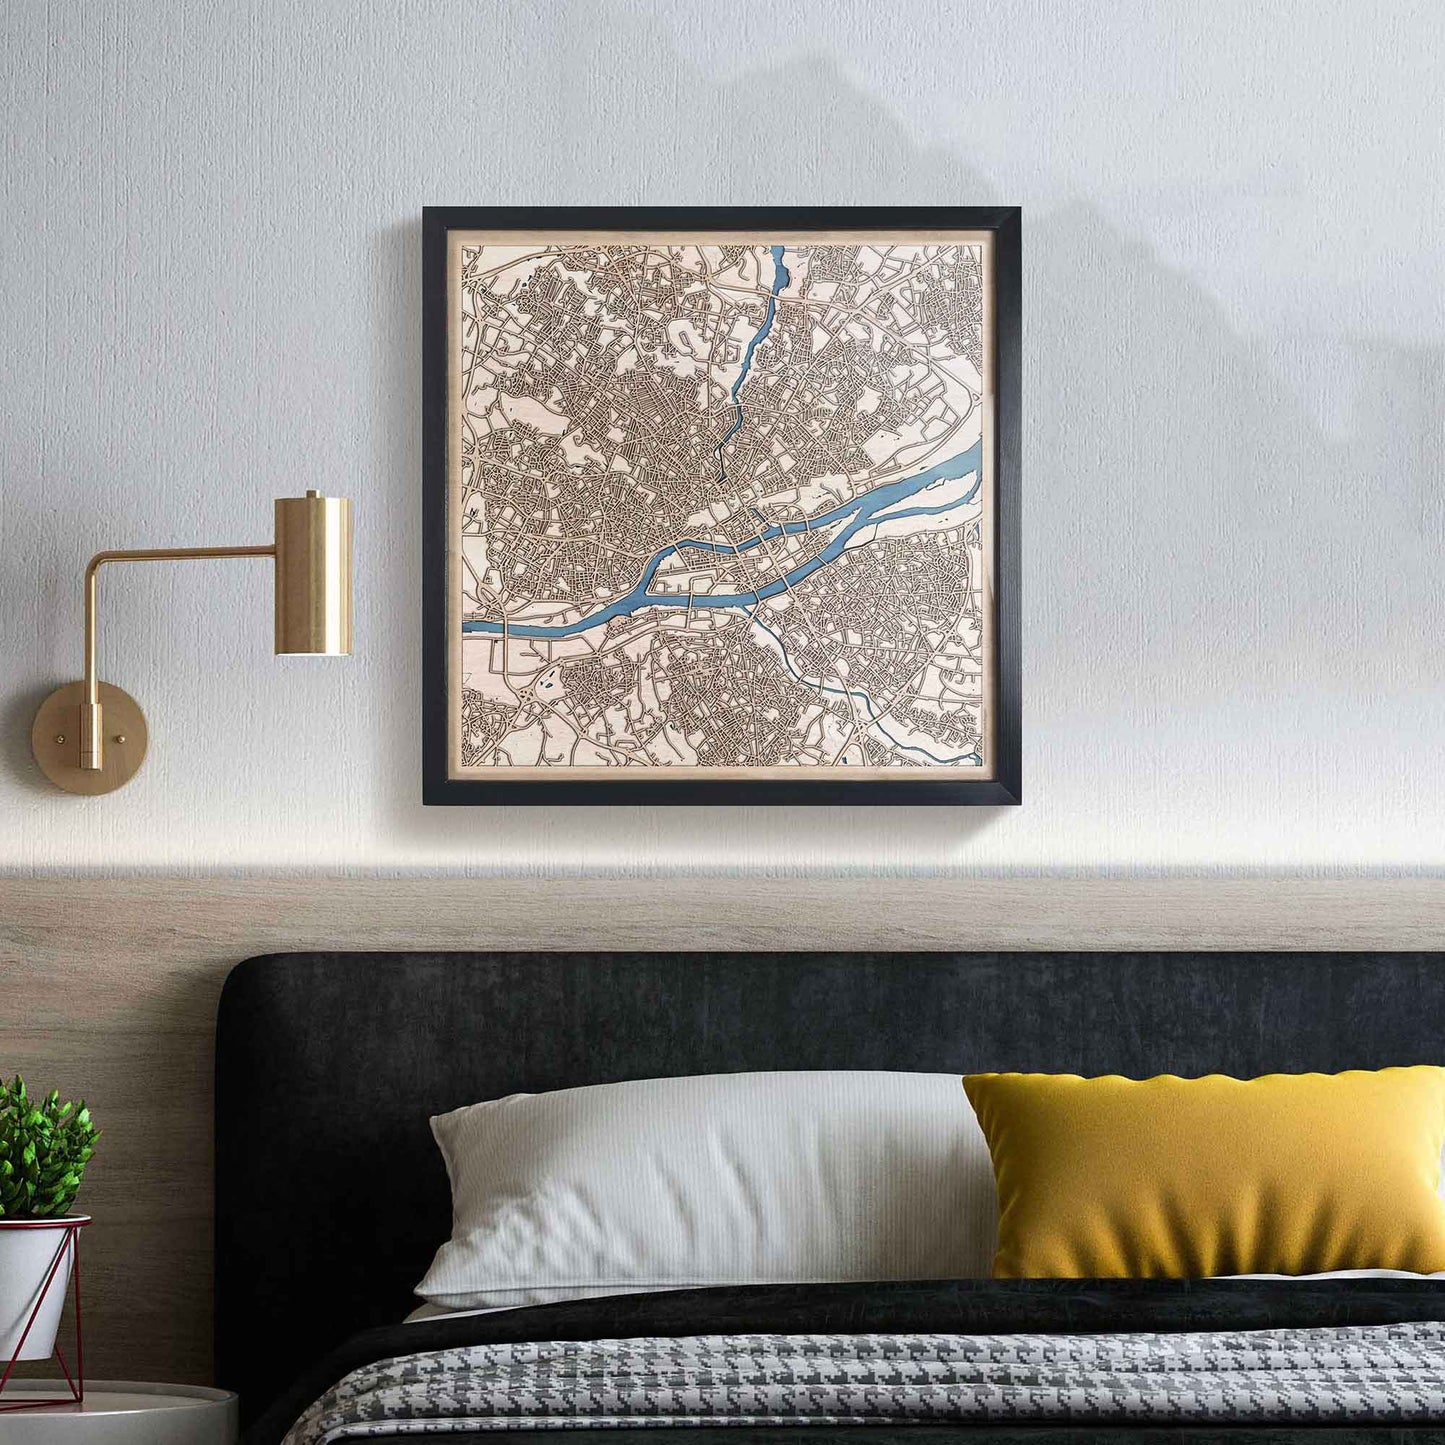 Nantes Wooden Map by CityWood - Custom Wood Map Art - Unique Laser Cut Engraved - Anniversary Gift